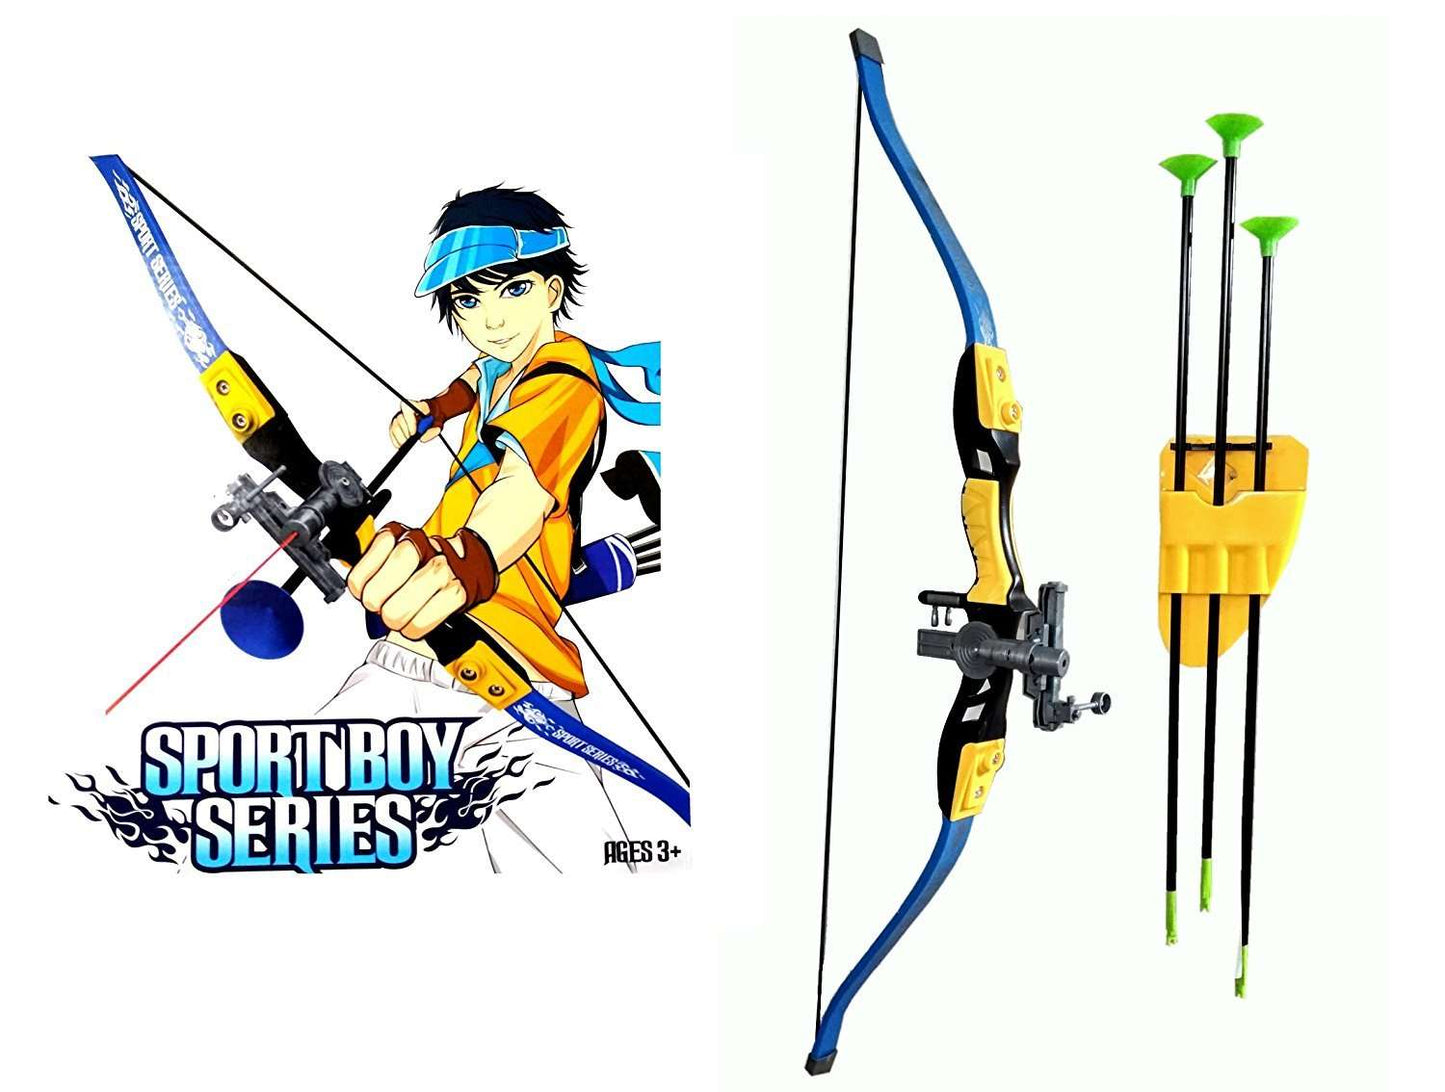 Archery Set, Strong String Thread Big Size Sports Series, Bow and Arrow Toy, Laser Target, Quiver, 3 Arrows